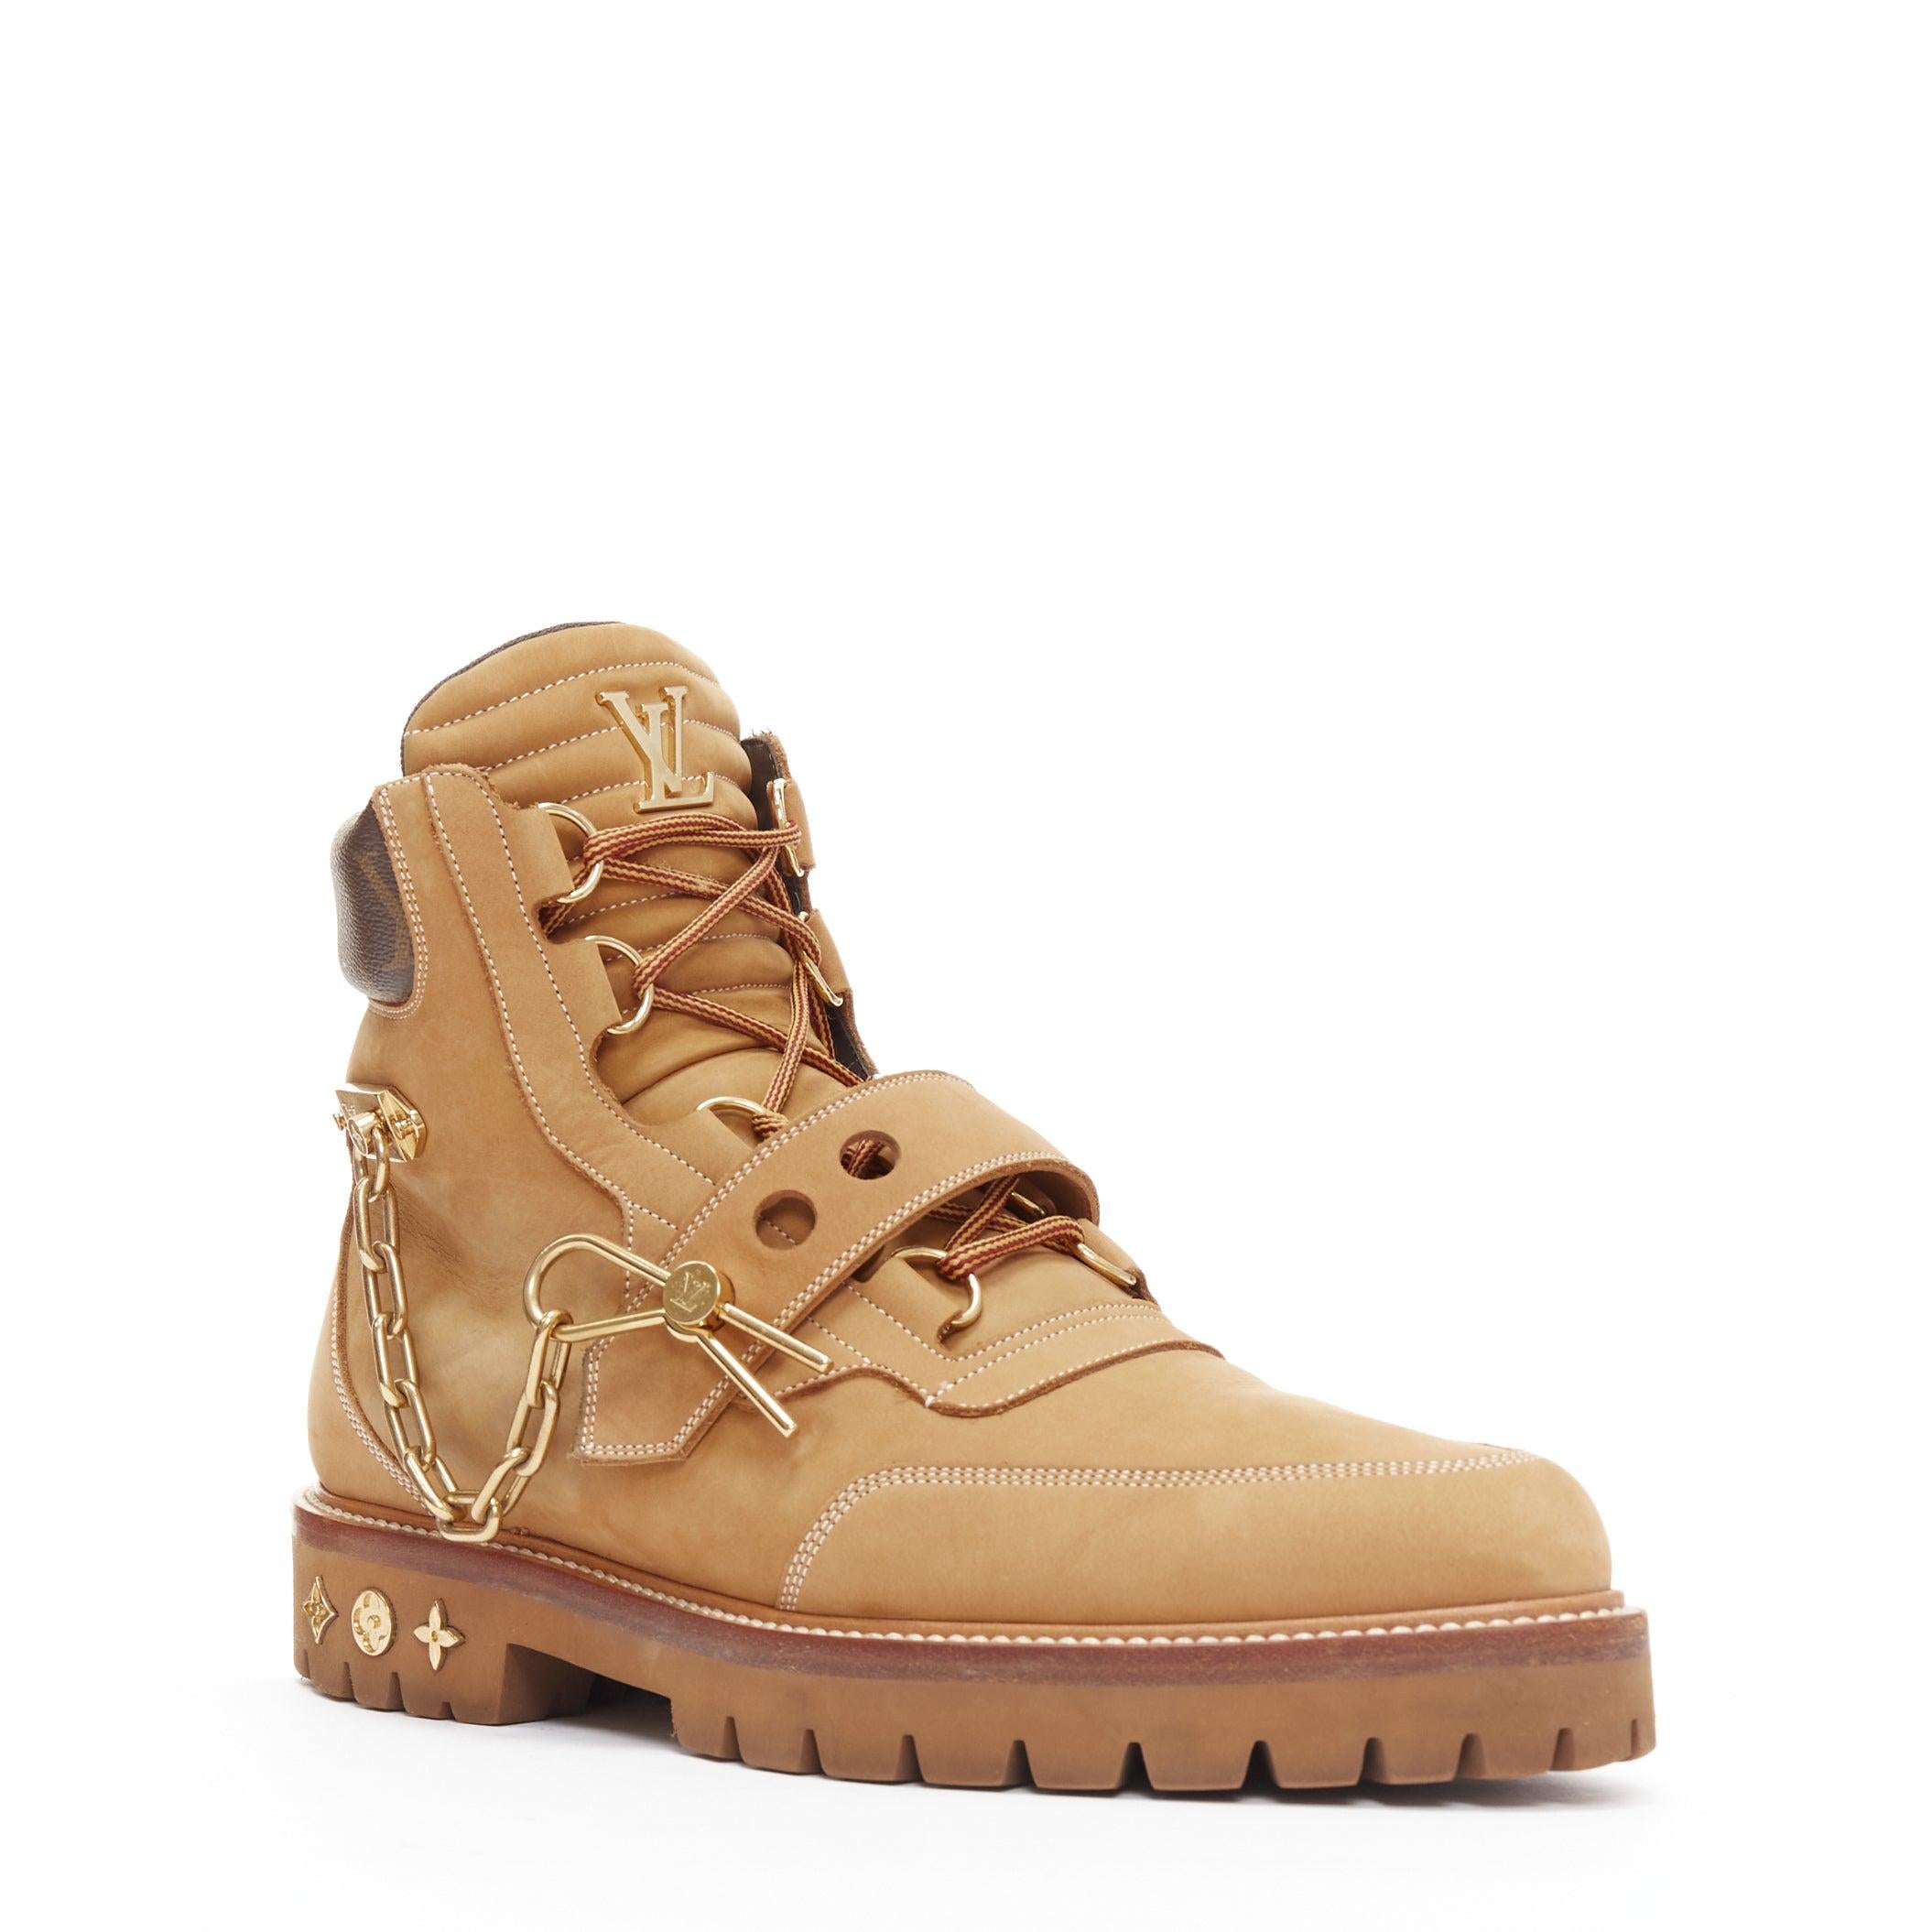 rare LOUIS VUITTON Virgil Abloh Runway LV Creeper tan gold chain boot UK8 EU42
Reference: TGAS/D00959
Brand: Louis Vuitton
Designer: Virgil Abloh
Model: LV Creeper
Collection: 2019 - Runway
Material: Suede
Color: Brown, Gold
Pattern: Solid
Closure: